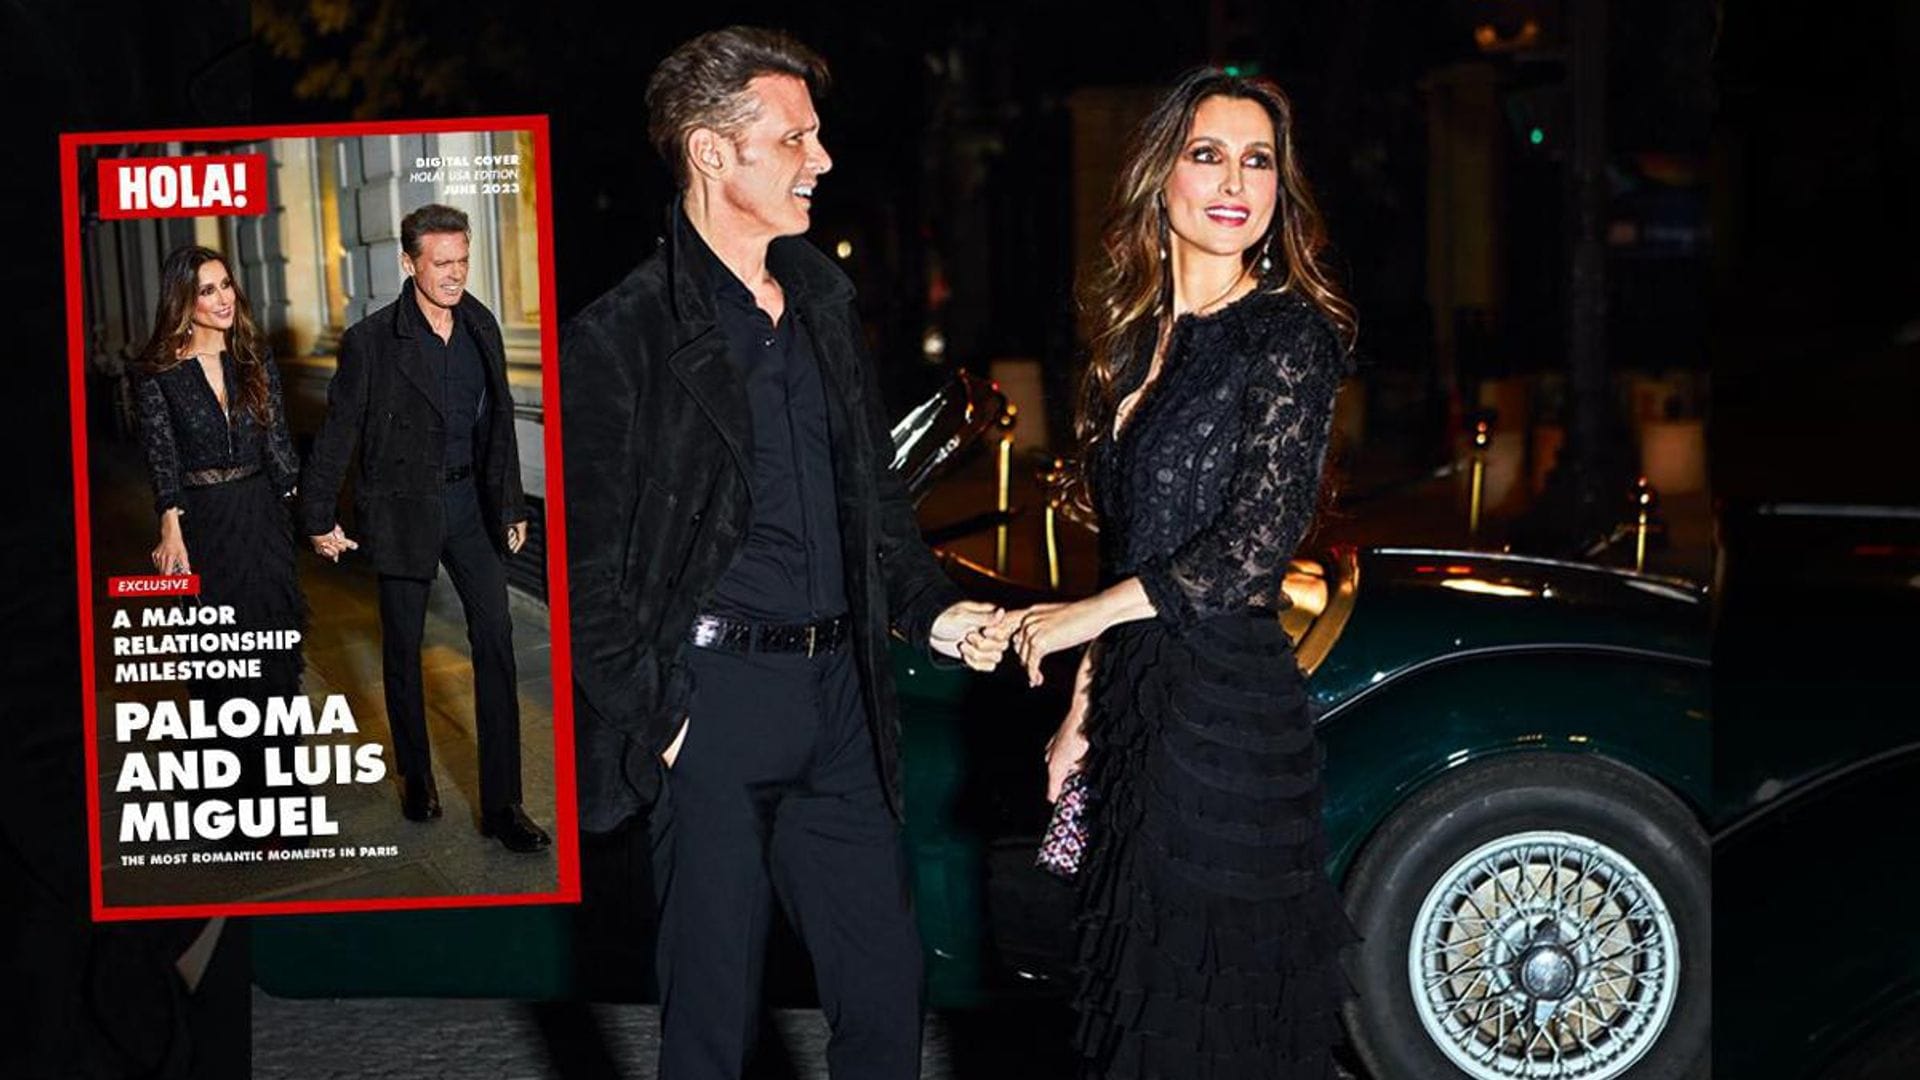 Paloma Cuevas and Luis Miguel’s relationship milestone: their most romantic moments in Paris